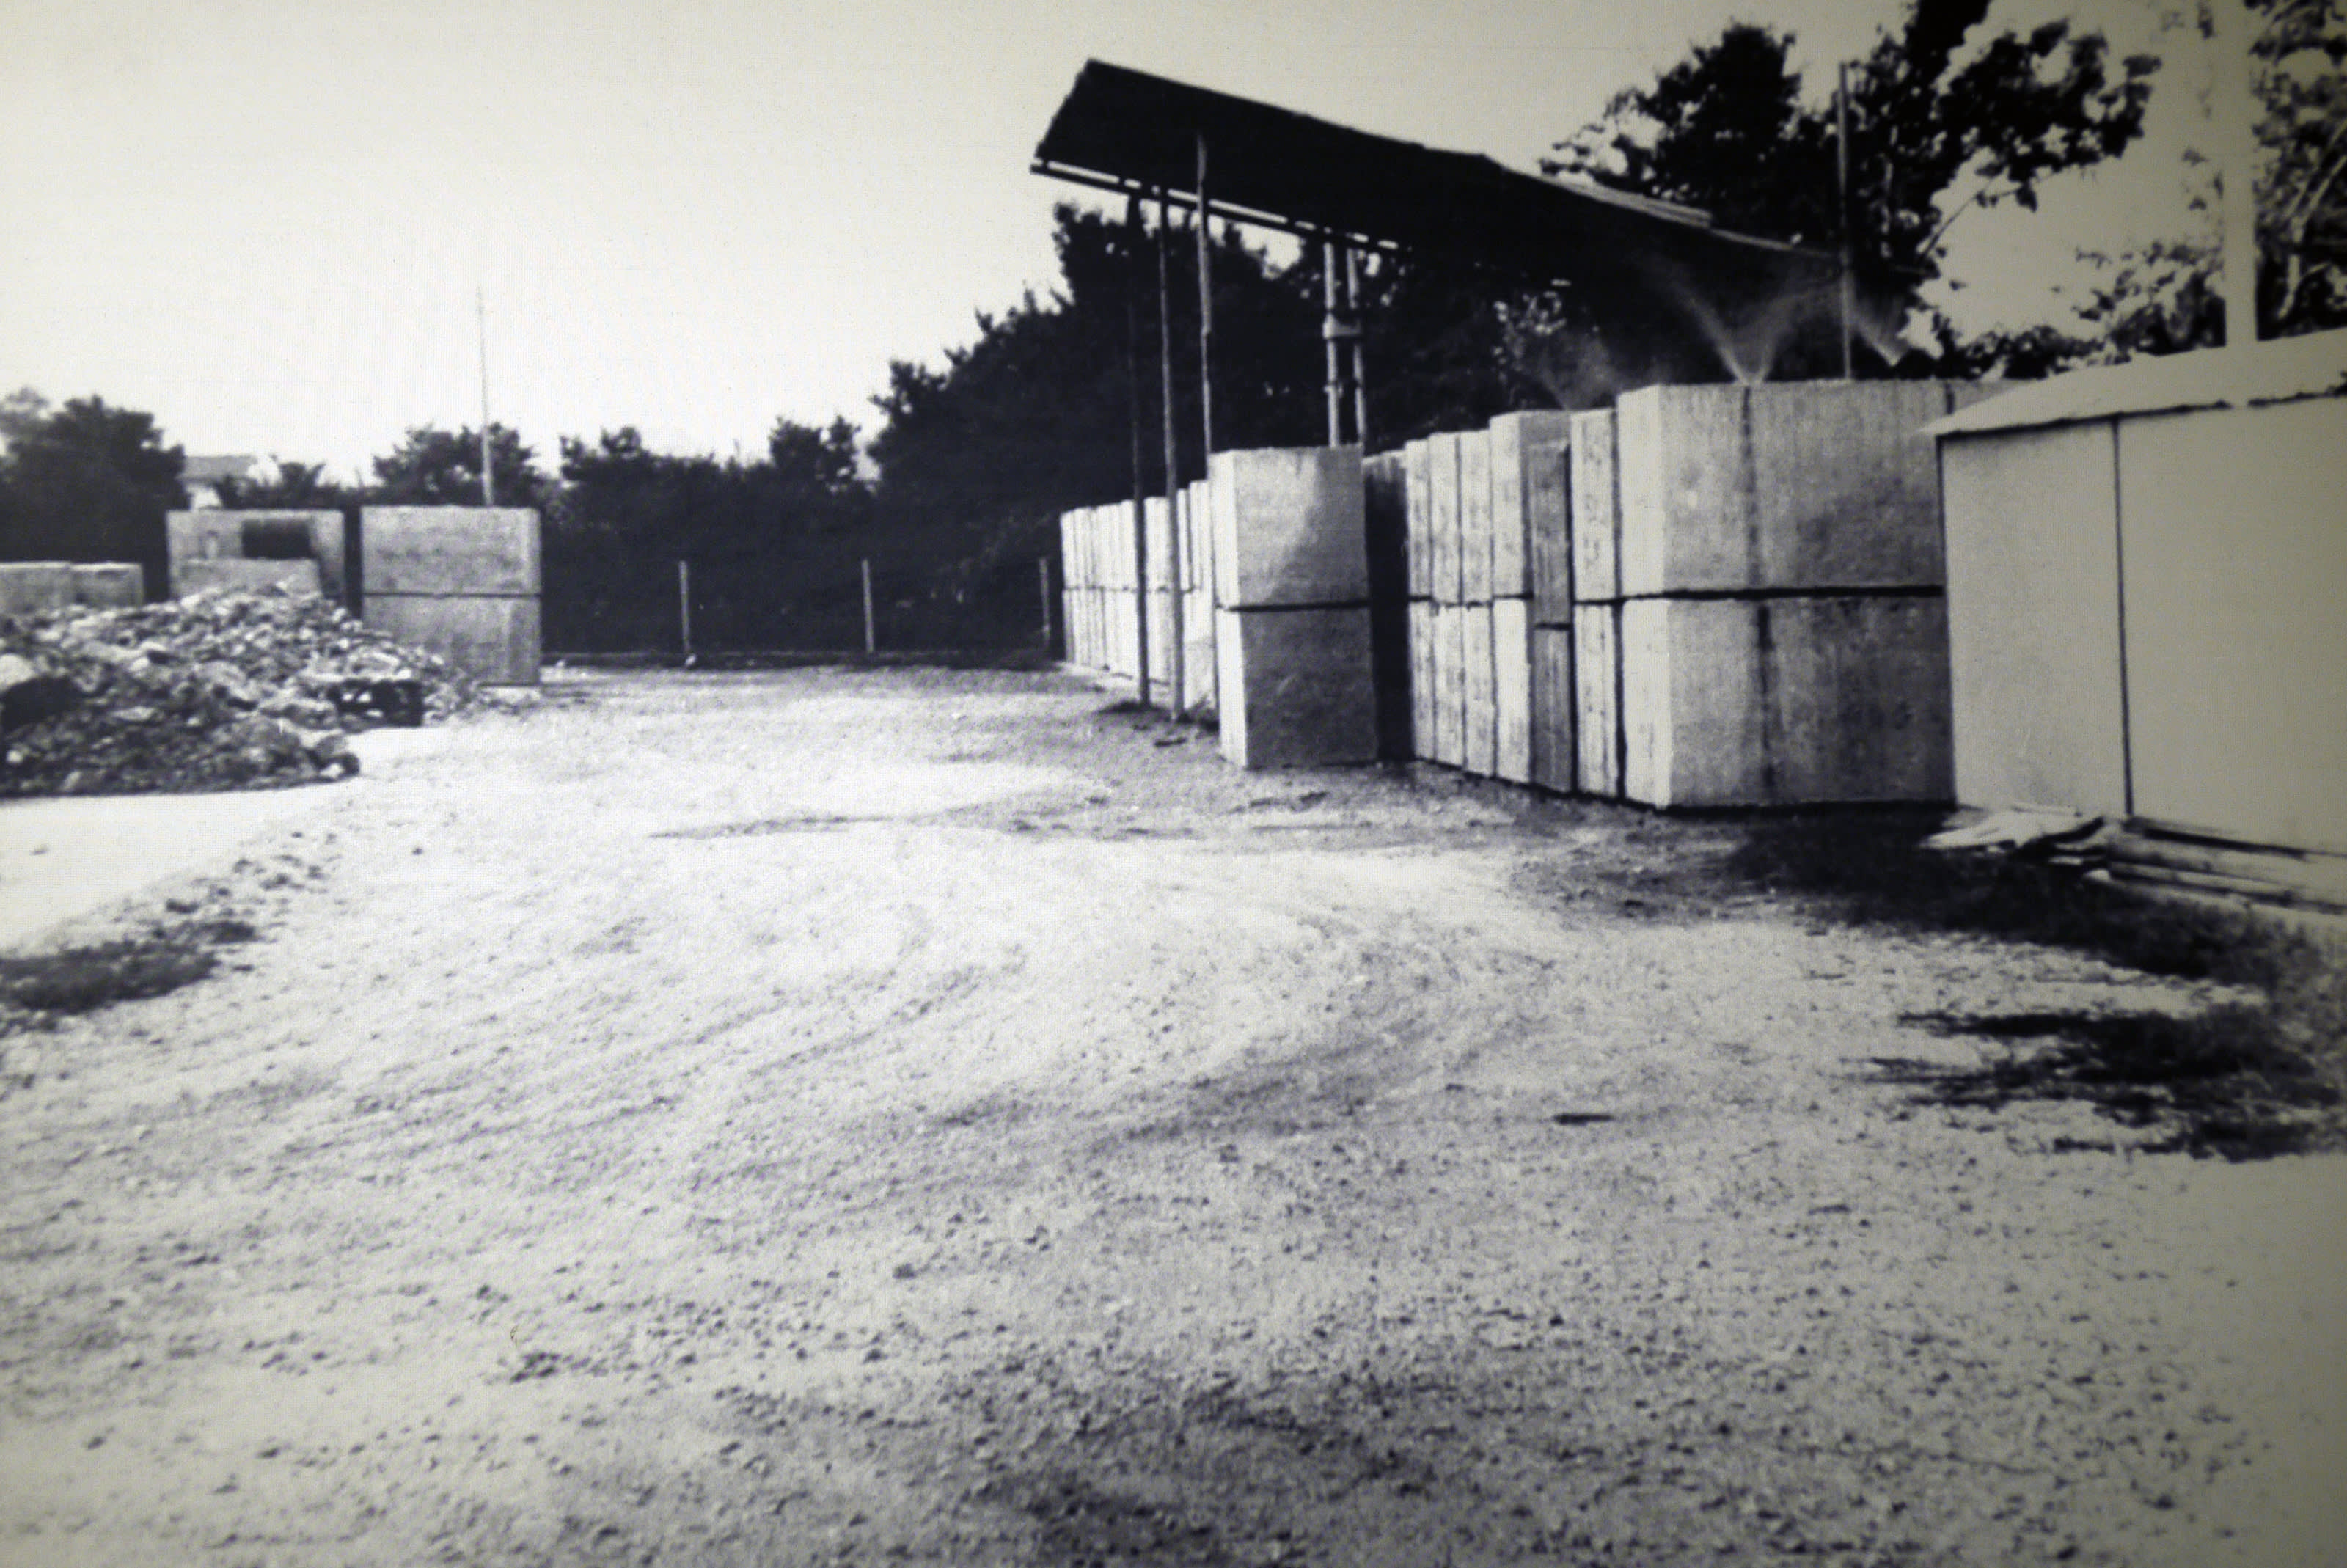 Archive image of an early precast terrazzo production from 1965.